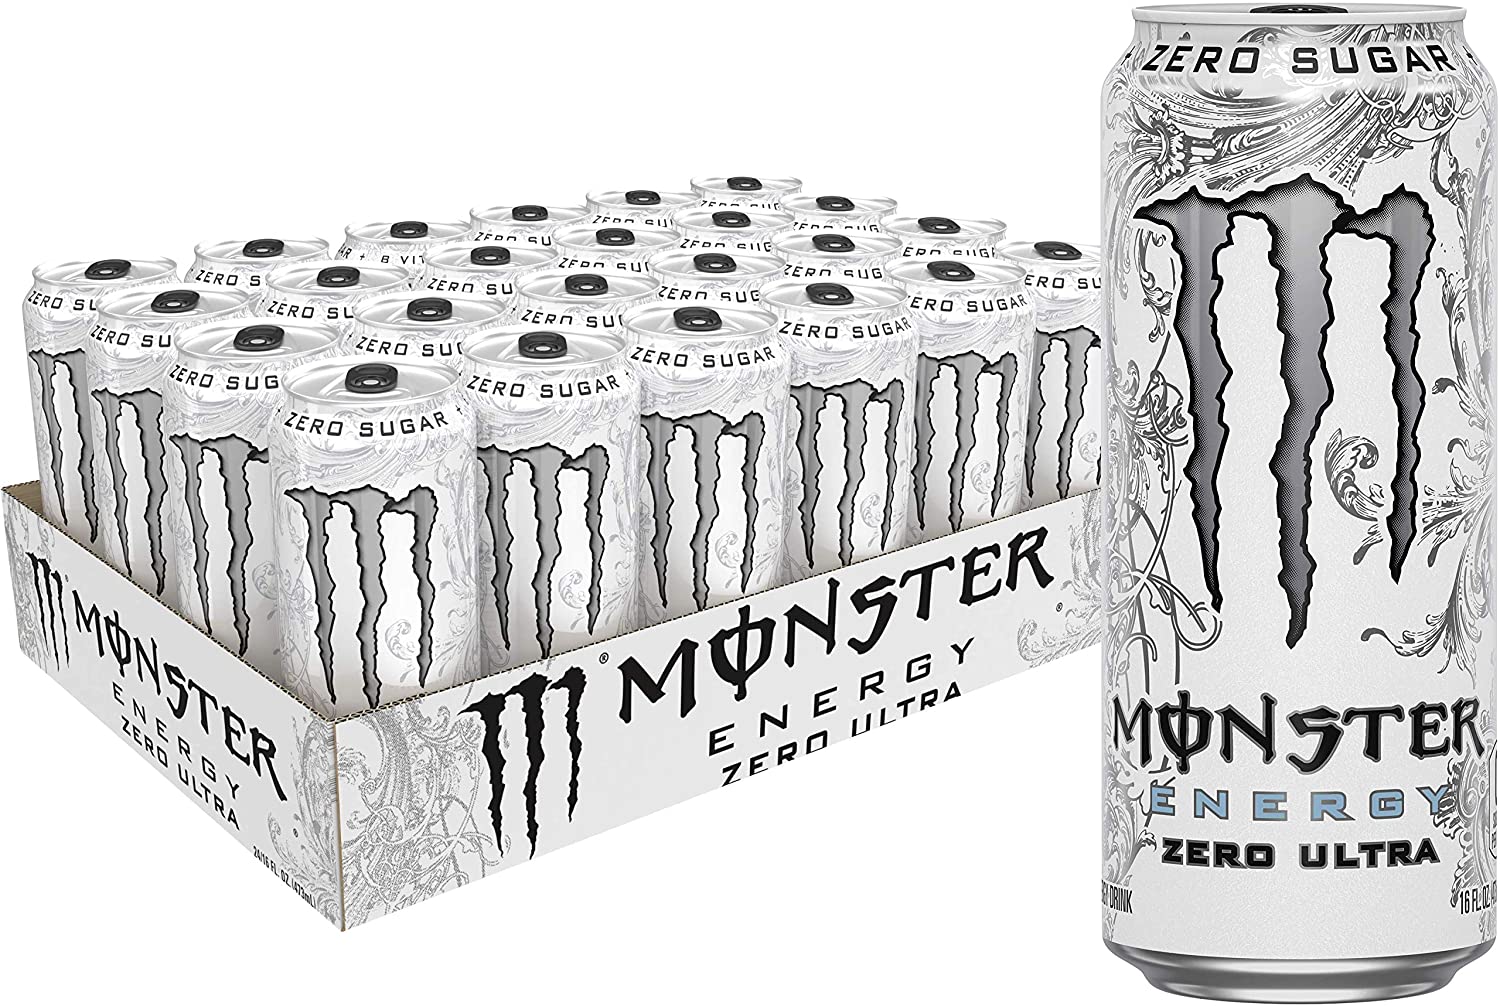 24-Pack 16-Oz Monster Energy Drink (Zero Ultra) $27.29 w/ S&S + Free Shipping